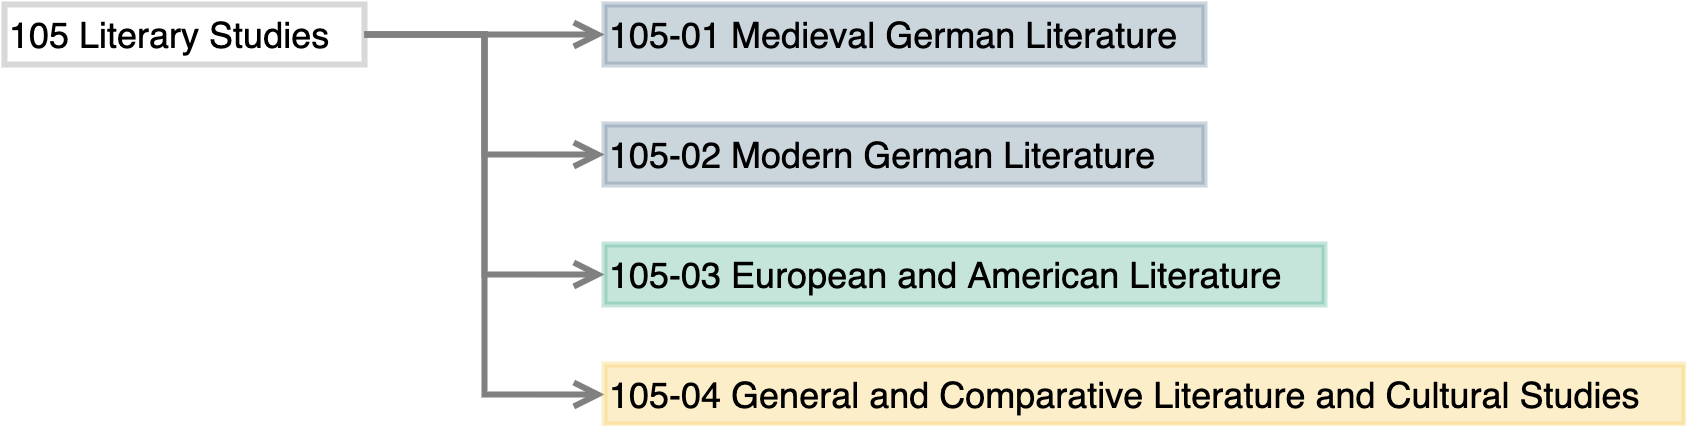 Figure 6: detail view of 105 Literary Studies and subgroups